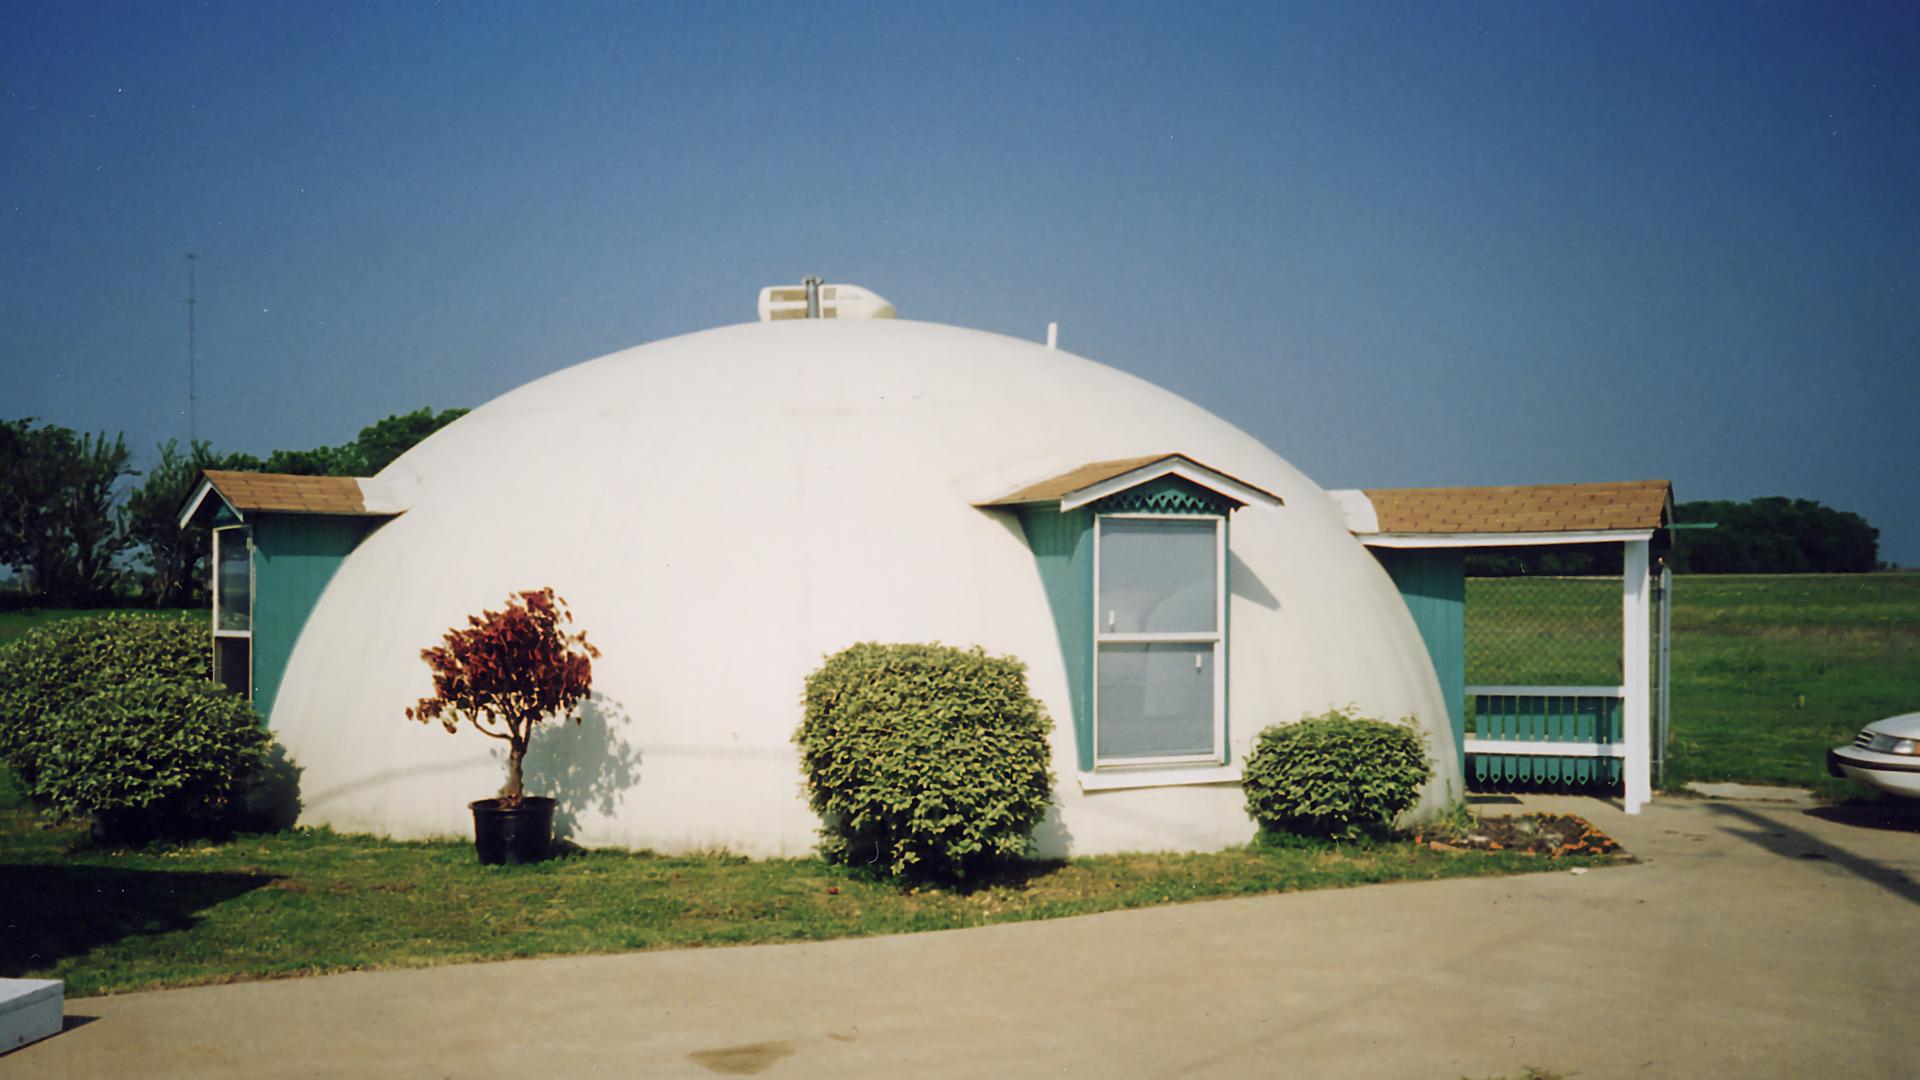 The Oberon two-bedroom dome home.